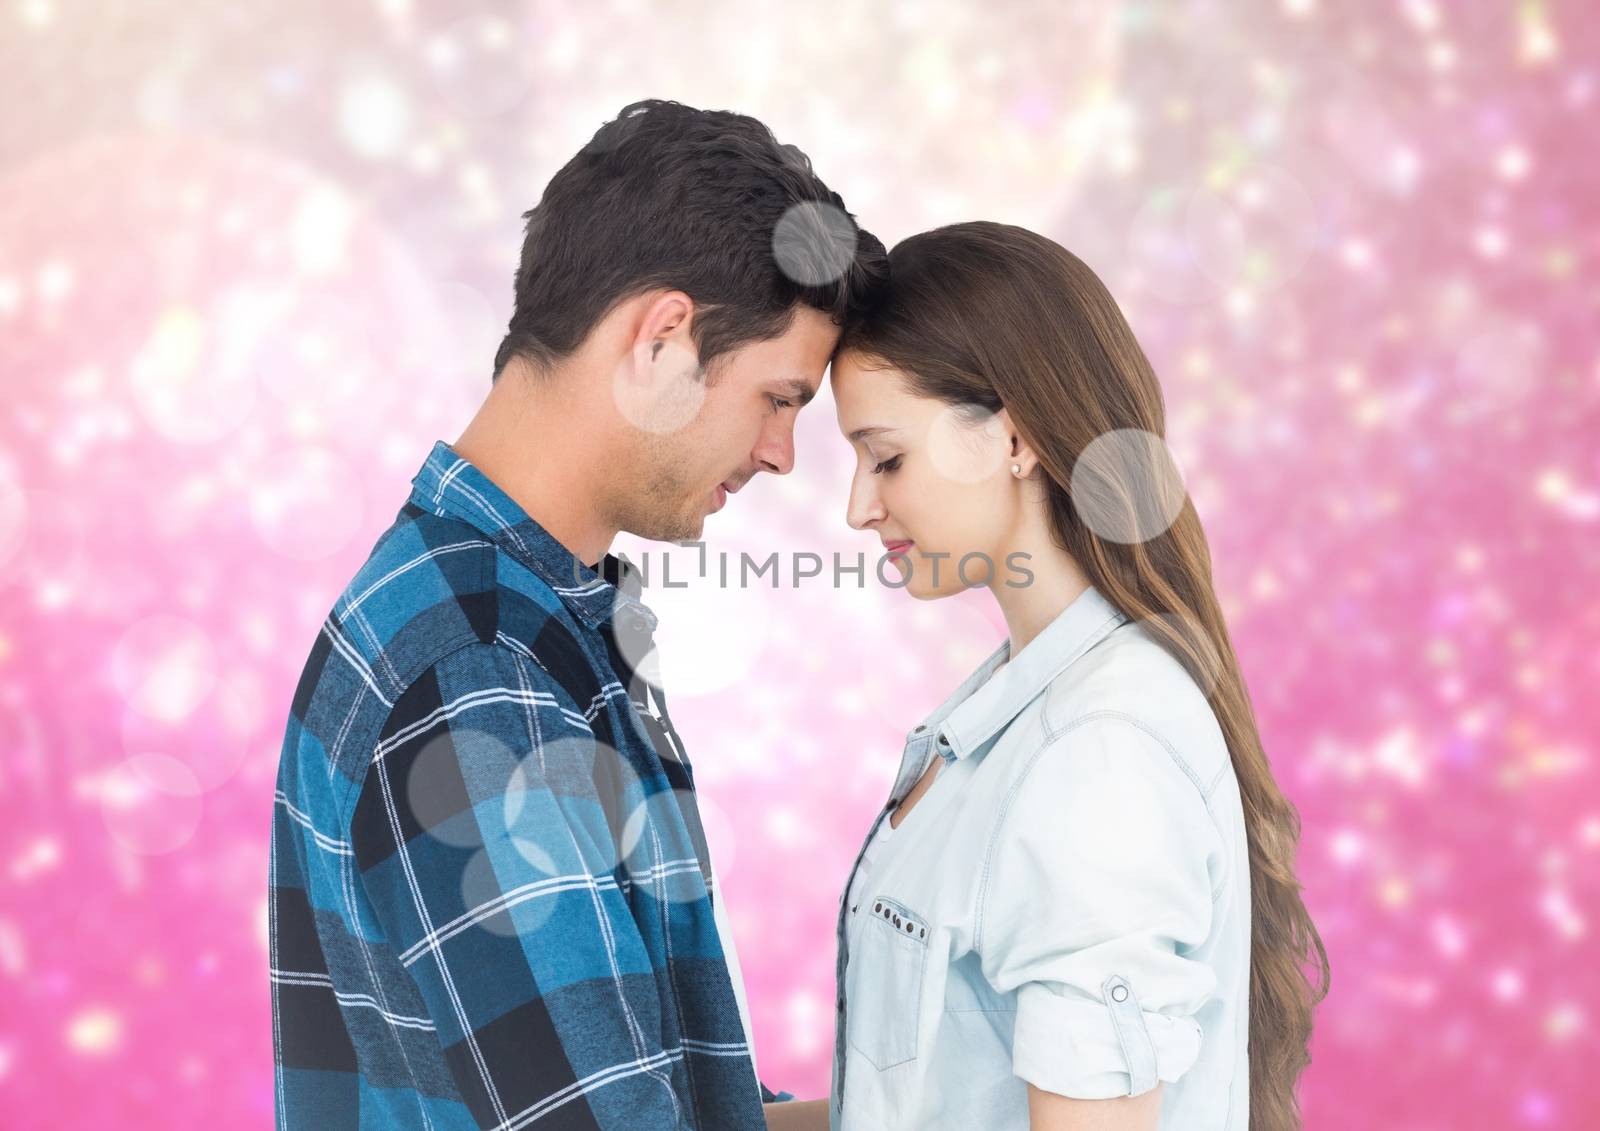 Composite image of romantic couple embracing each other by Wavebreakmedia